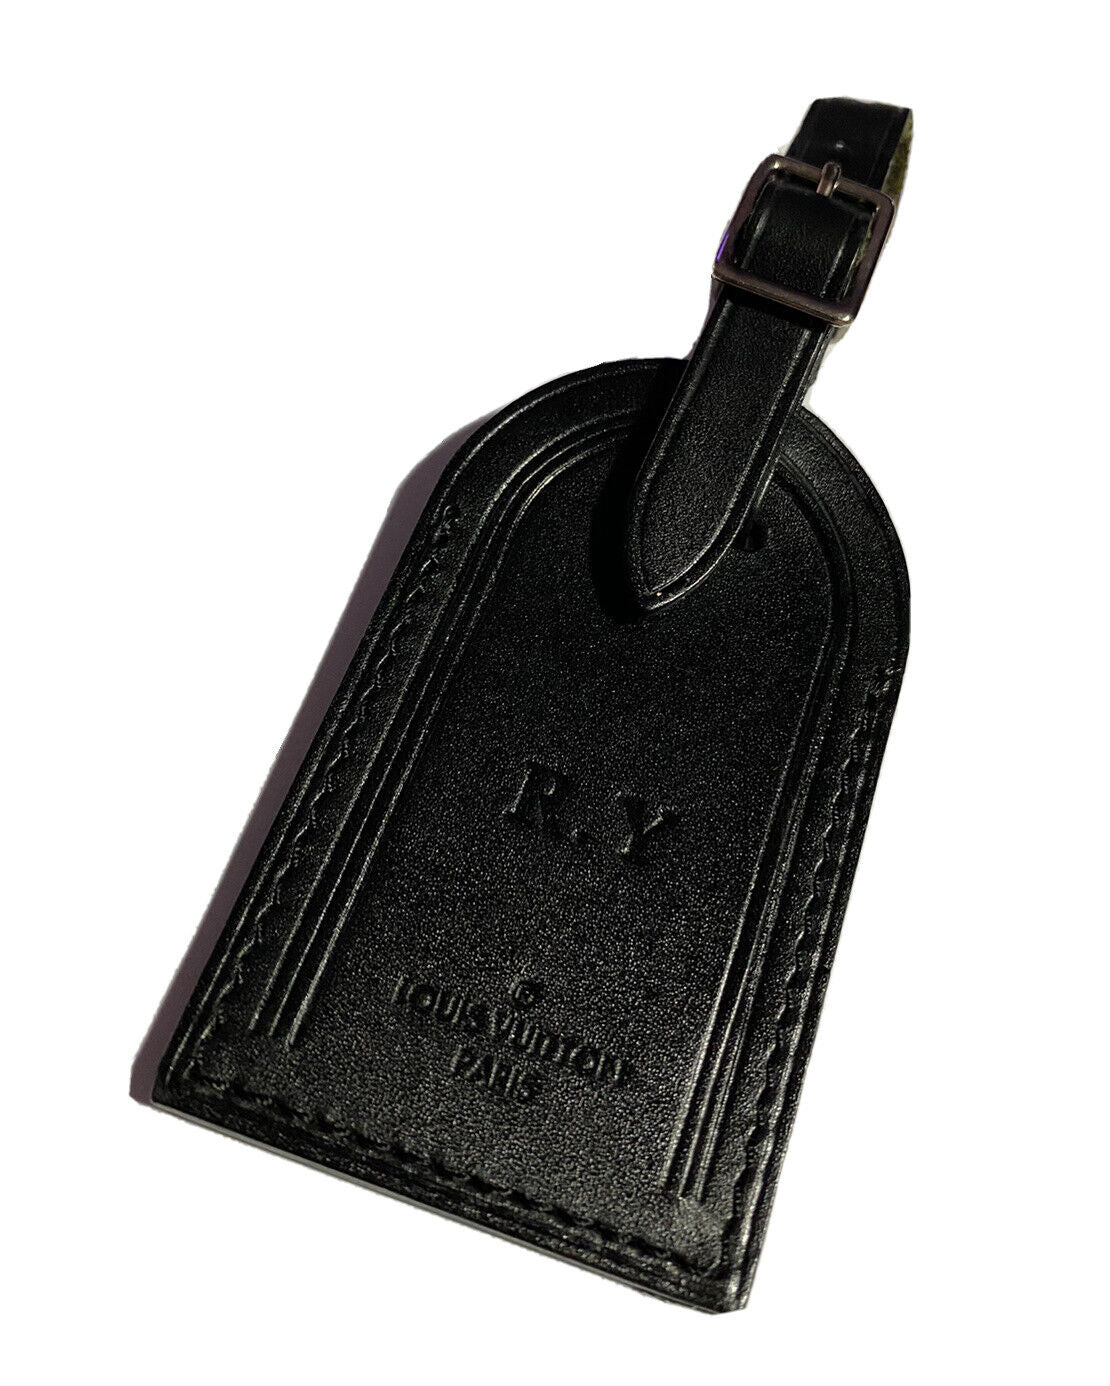 Louis Vuitton Black Leather Name Tag w/ RY Initials Large Goldtone or Goldtone